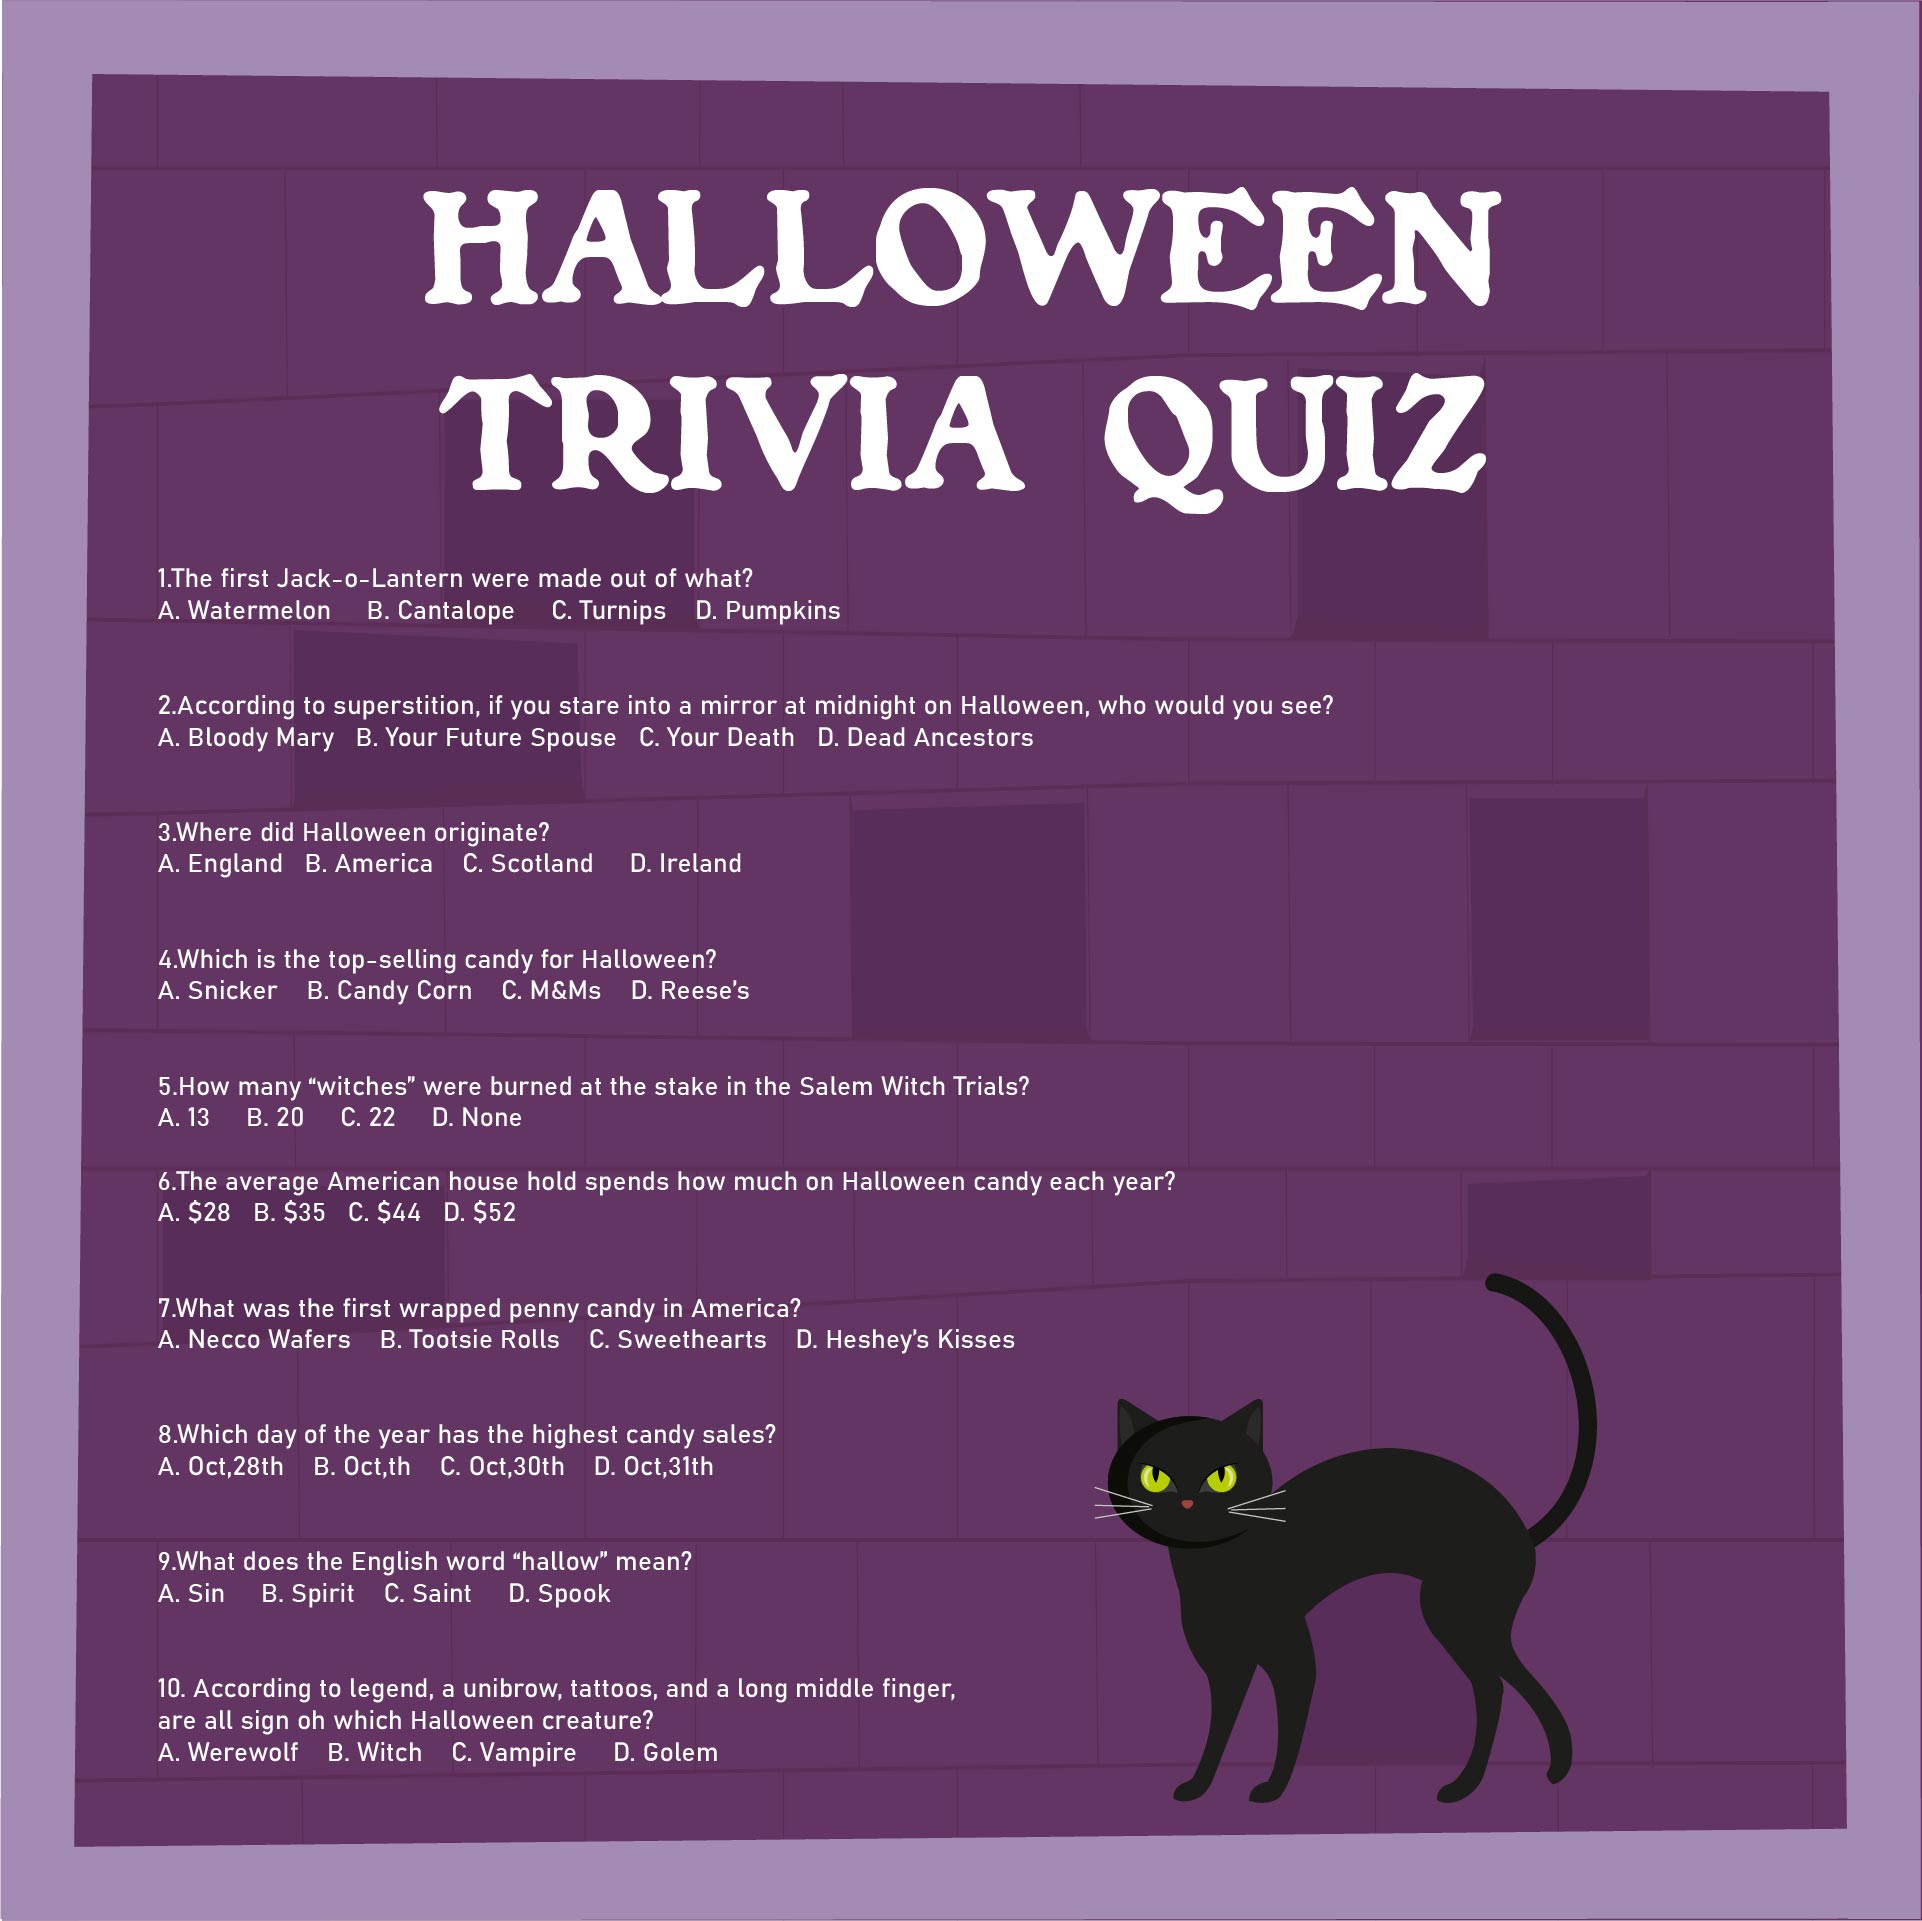 Halloween Trivia Questions and Answers